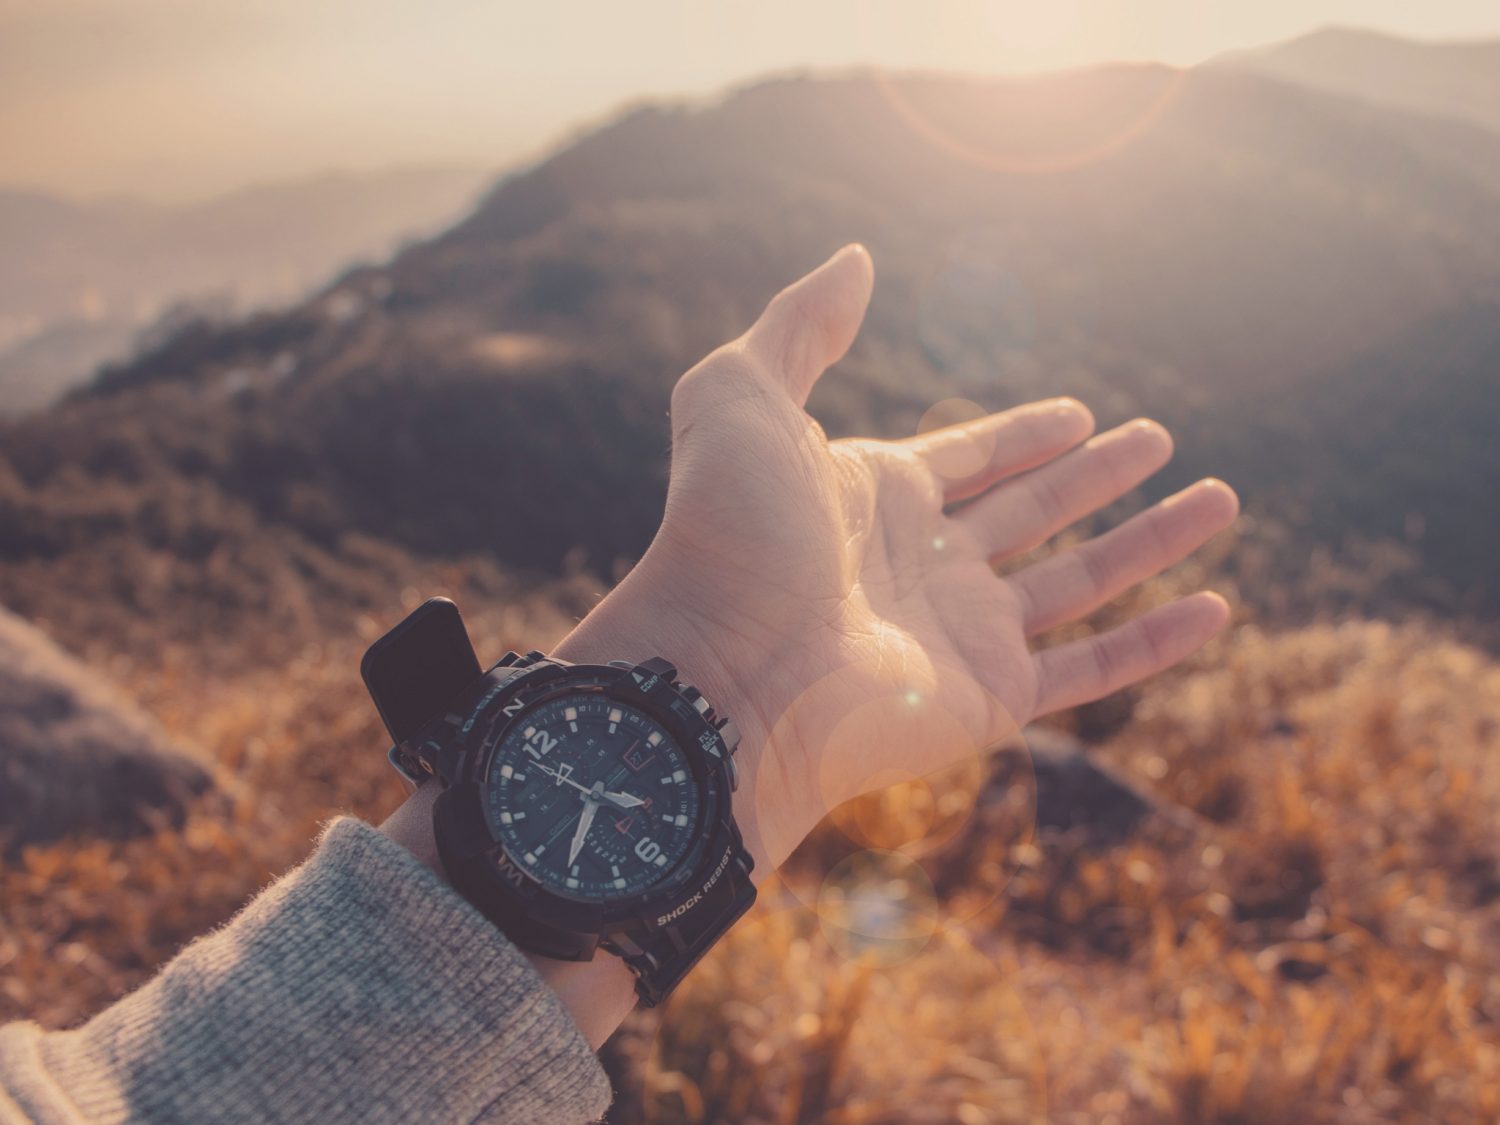 4 Of The Best Men's Watches For Adventure Travel